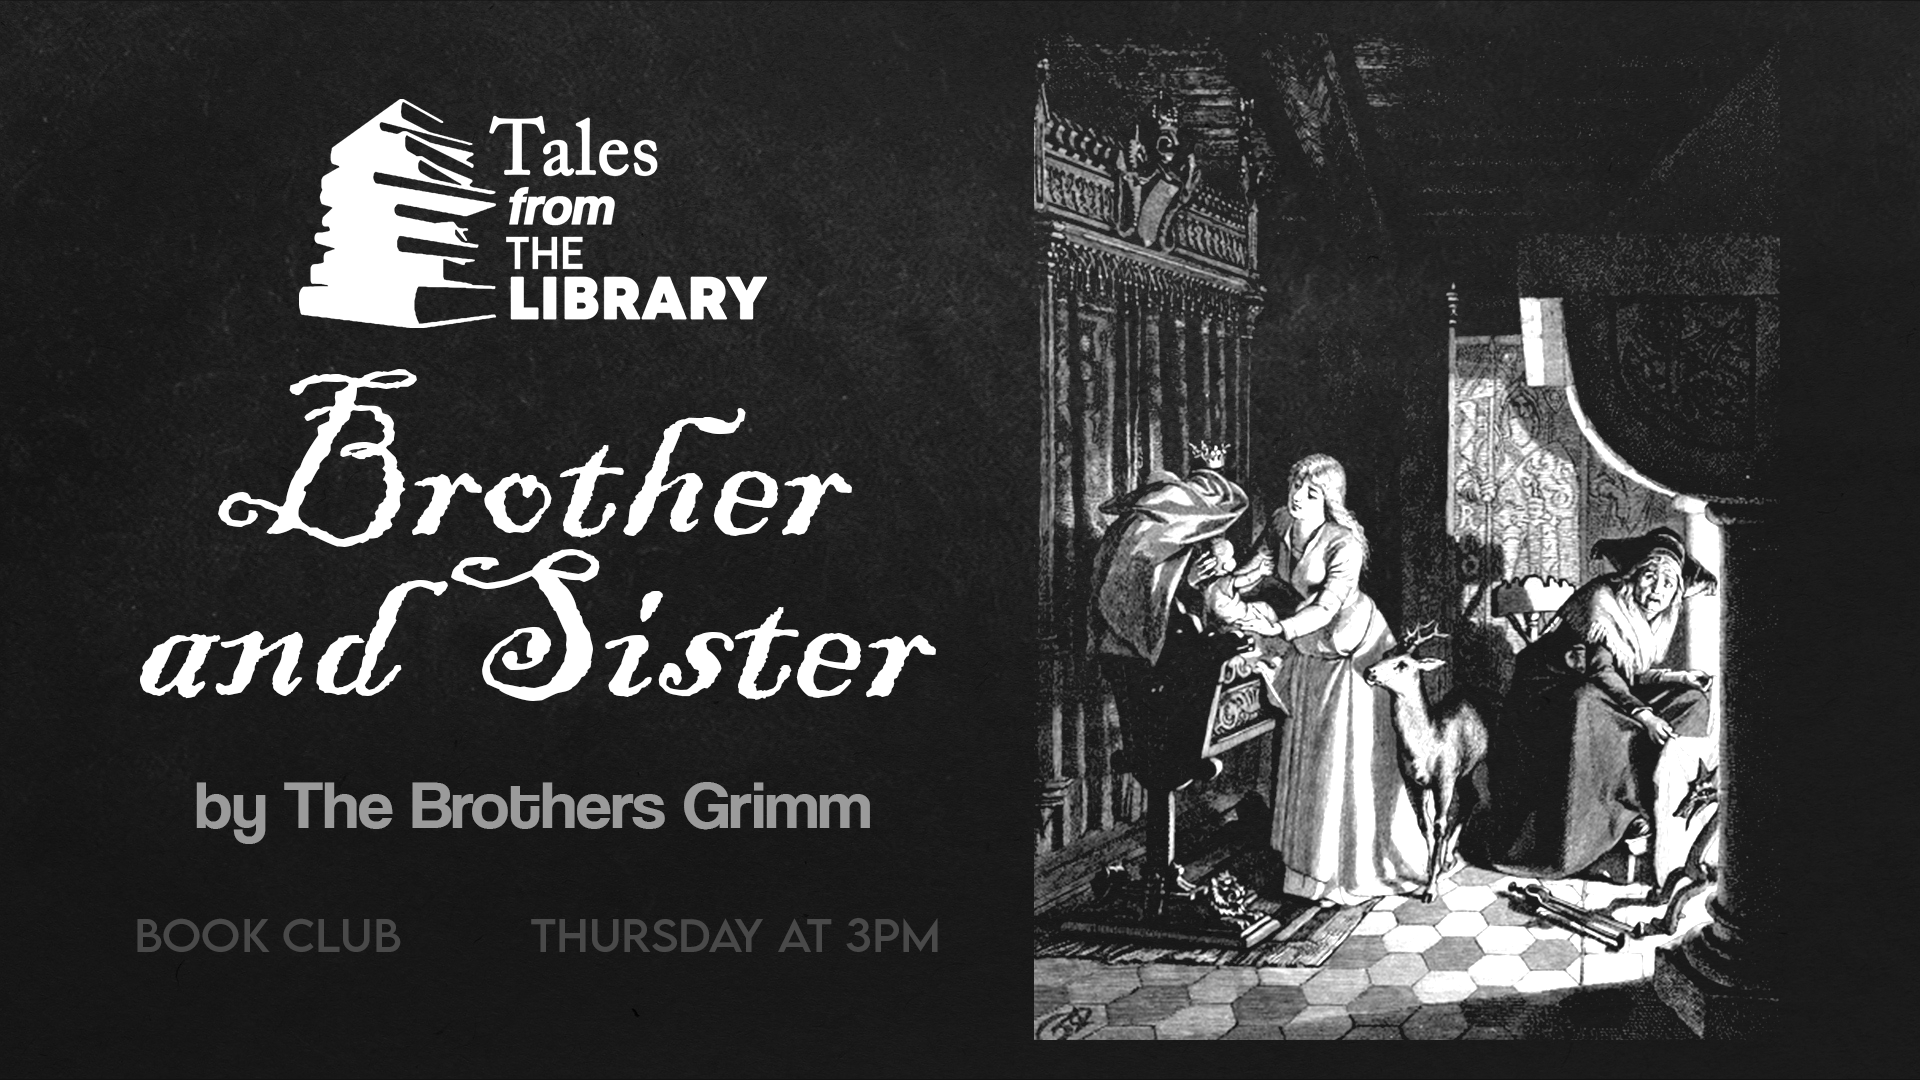 Tales From The Library - Brother and Sister